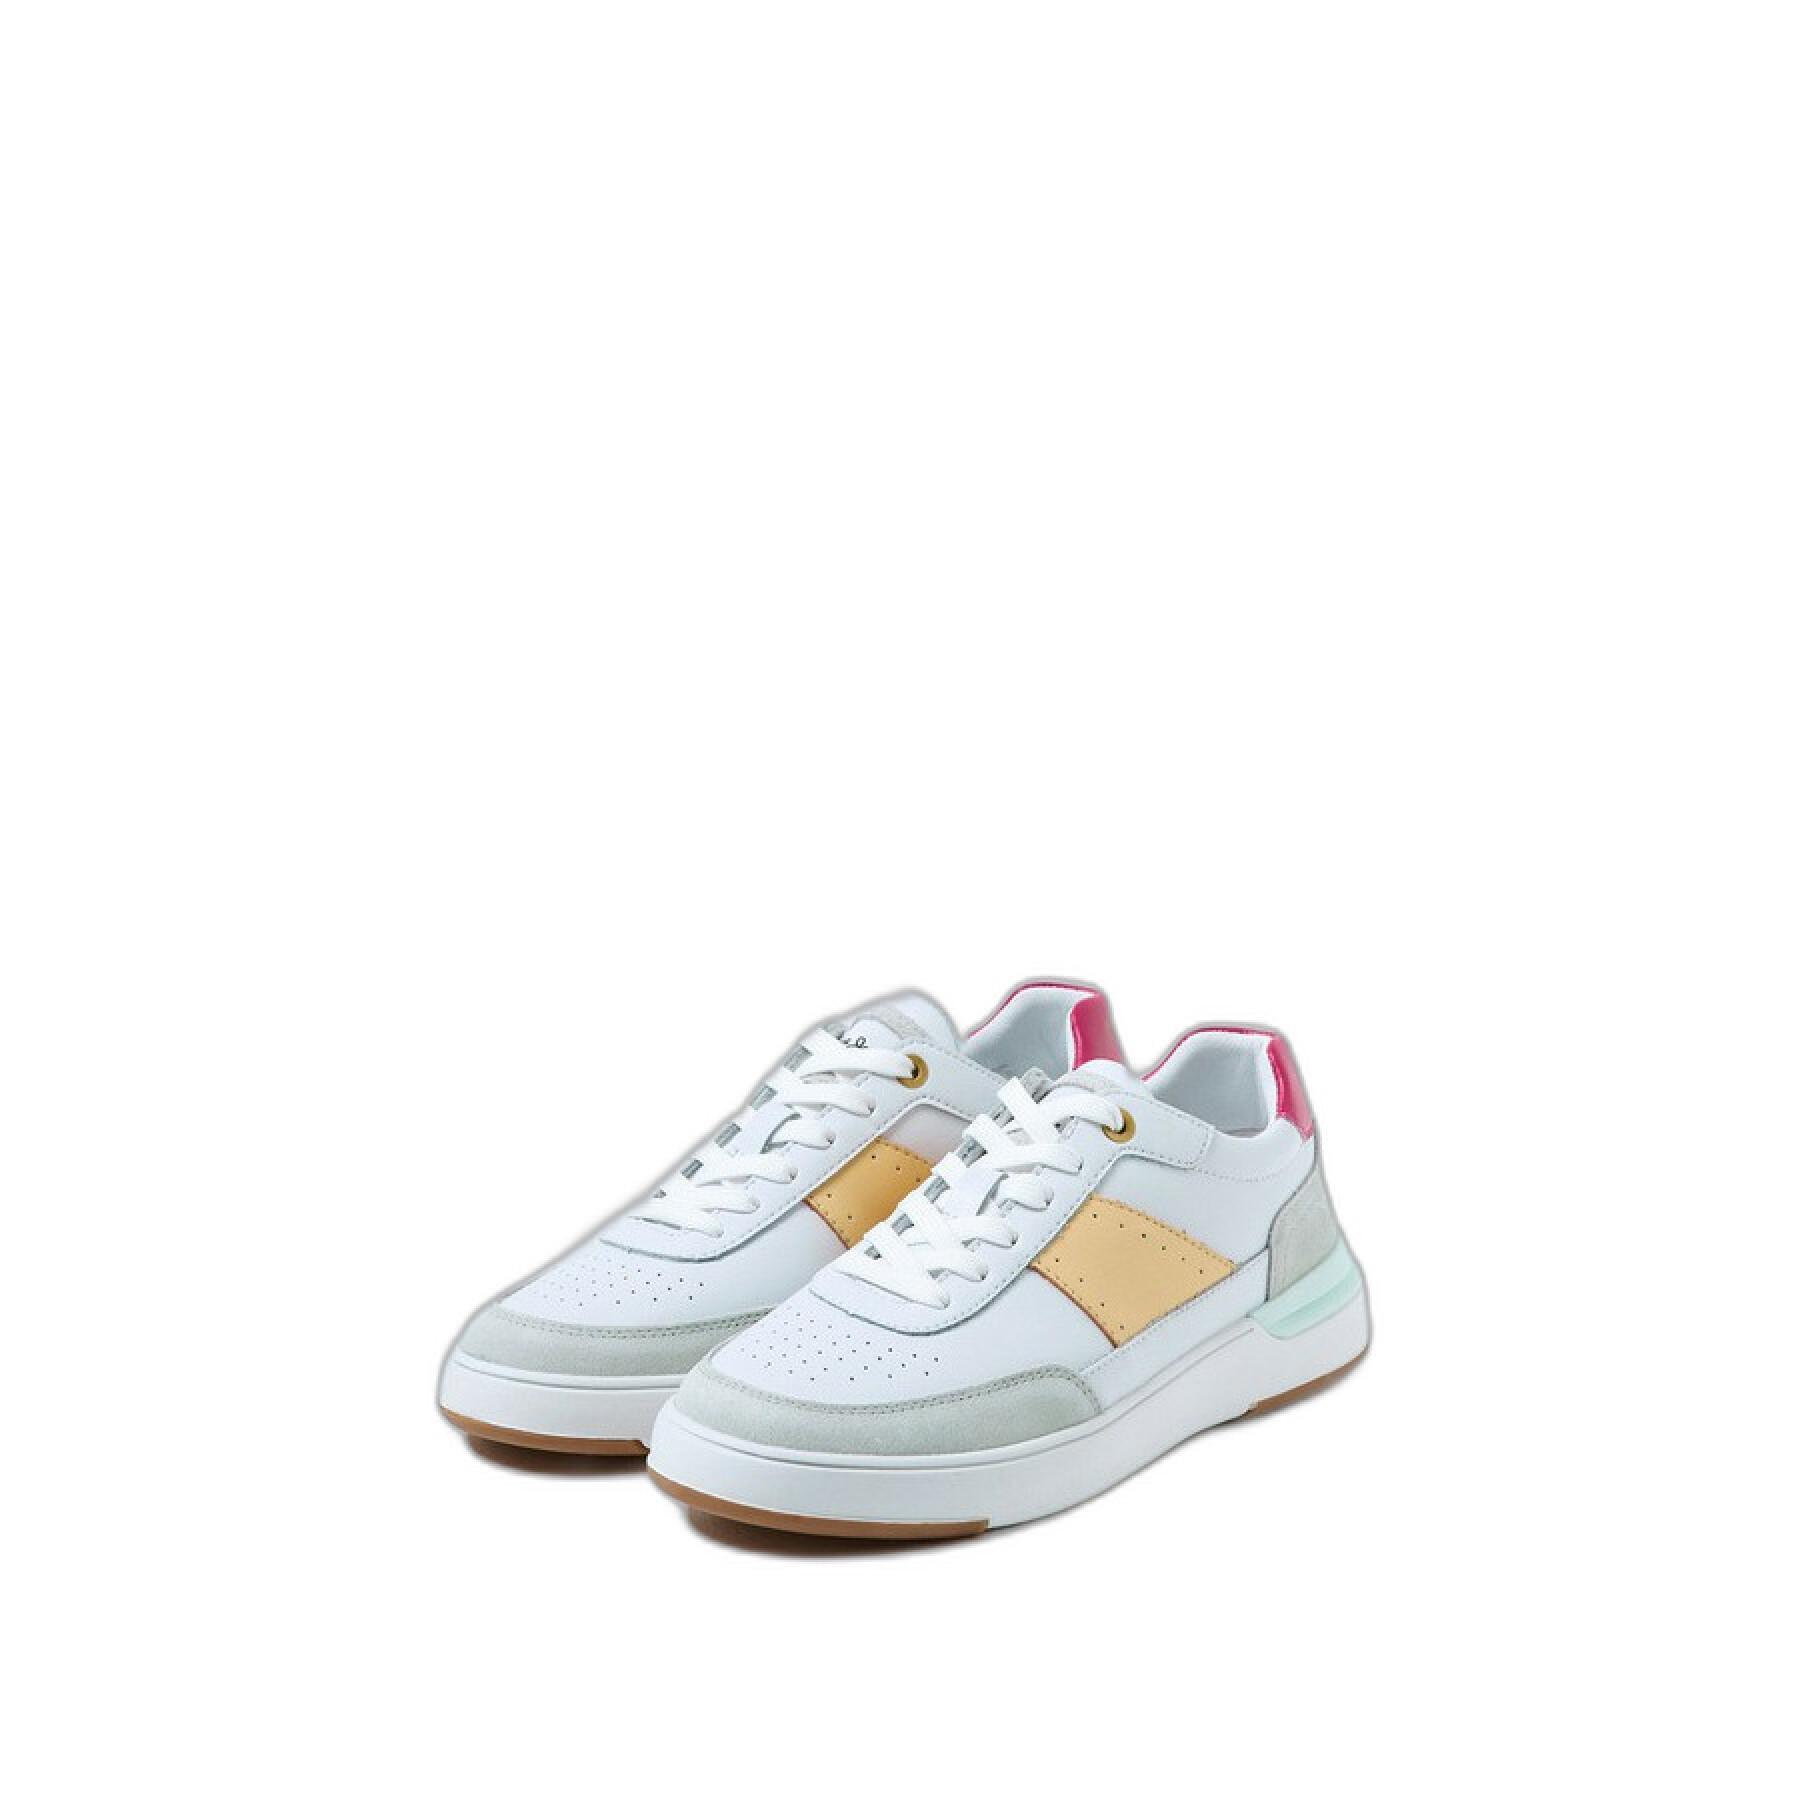 Women's sneakers Pepe Jeans Baxter Colors